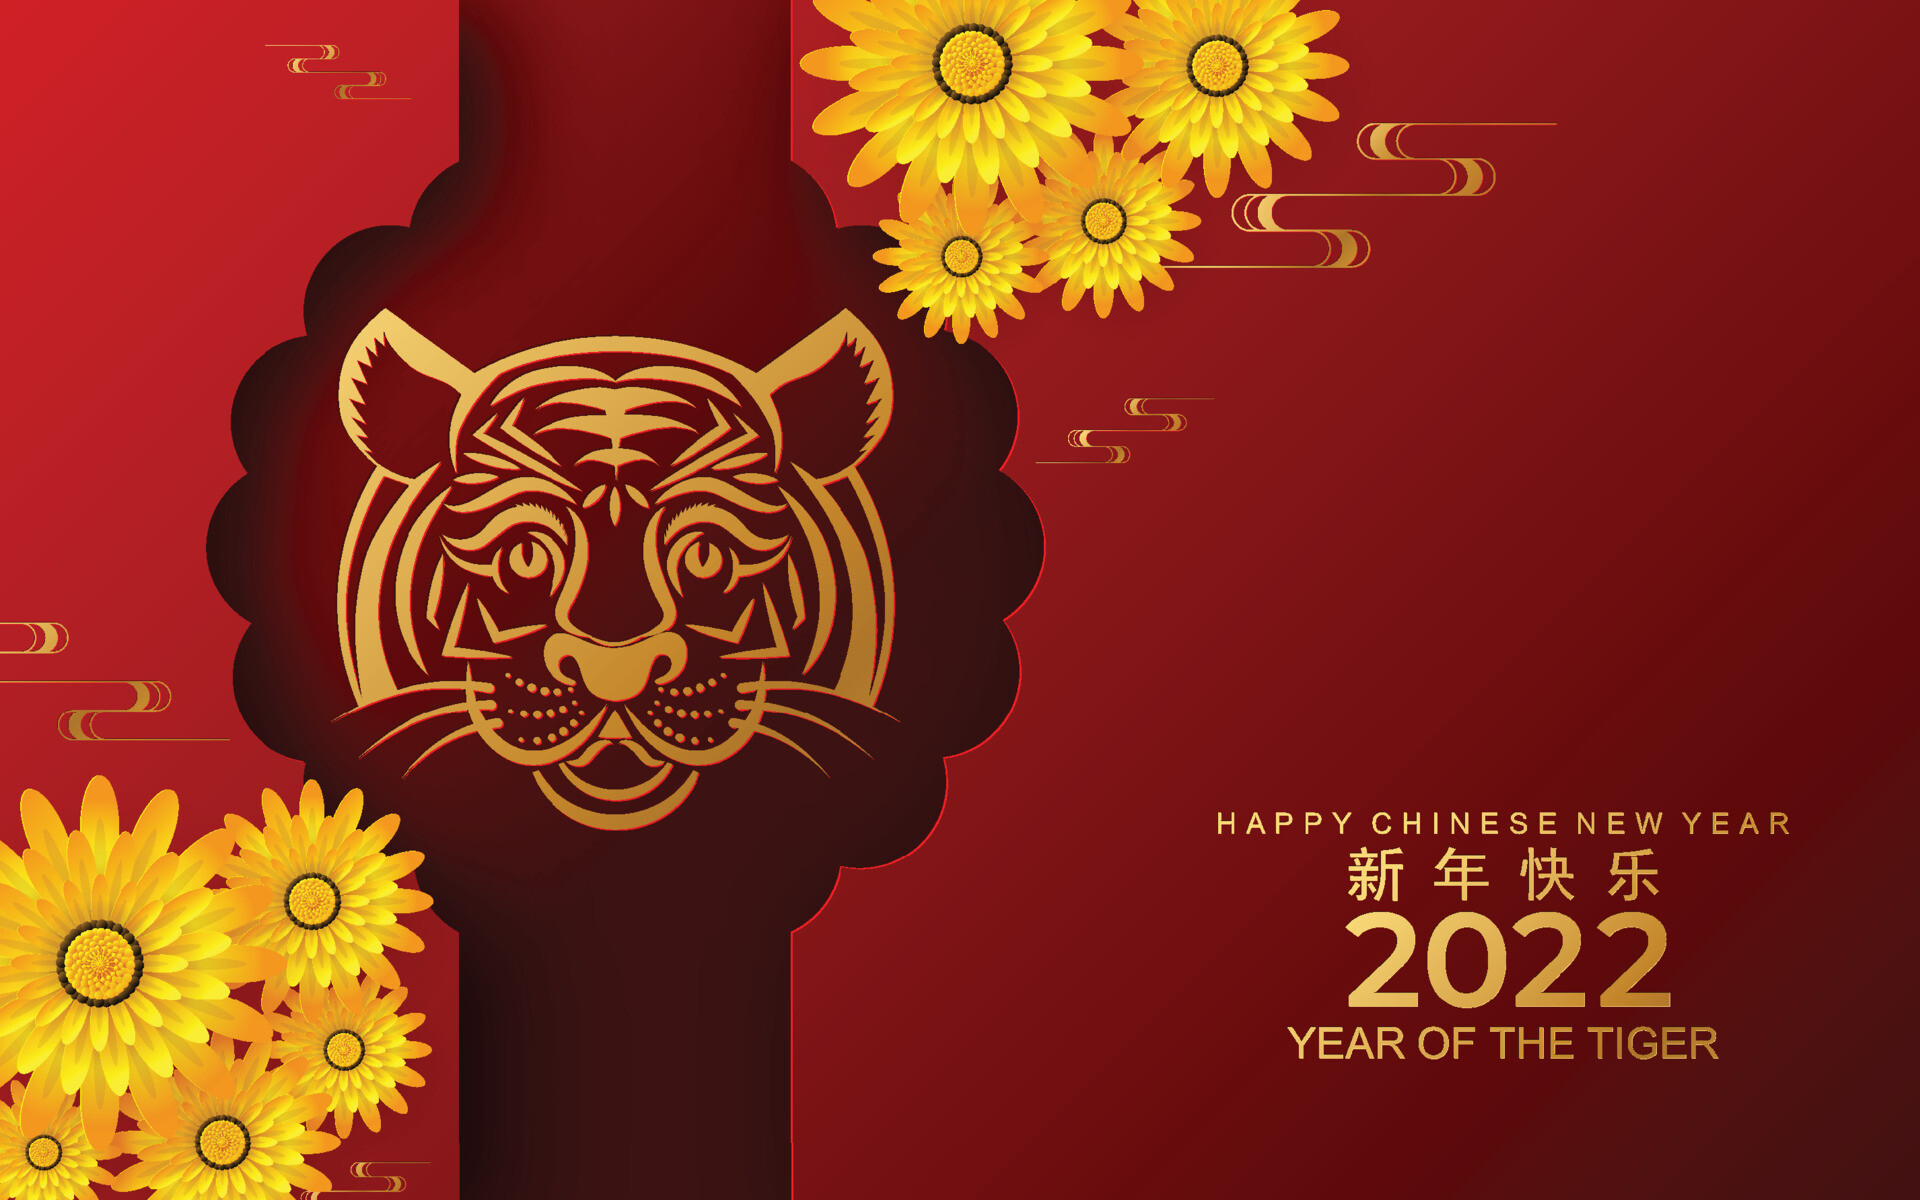 Tiger 2022, Chinese New Year, Year of the Tiger, Festive traditions, 1920x1200 HD Desktop